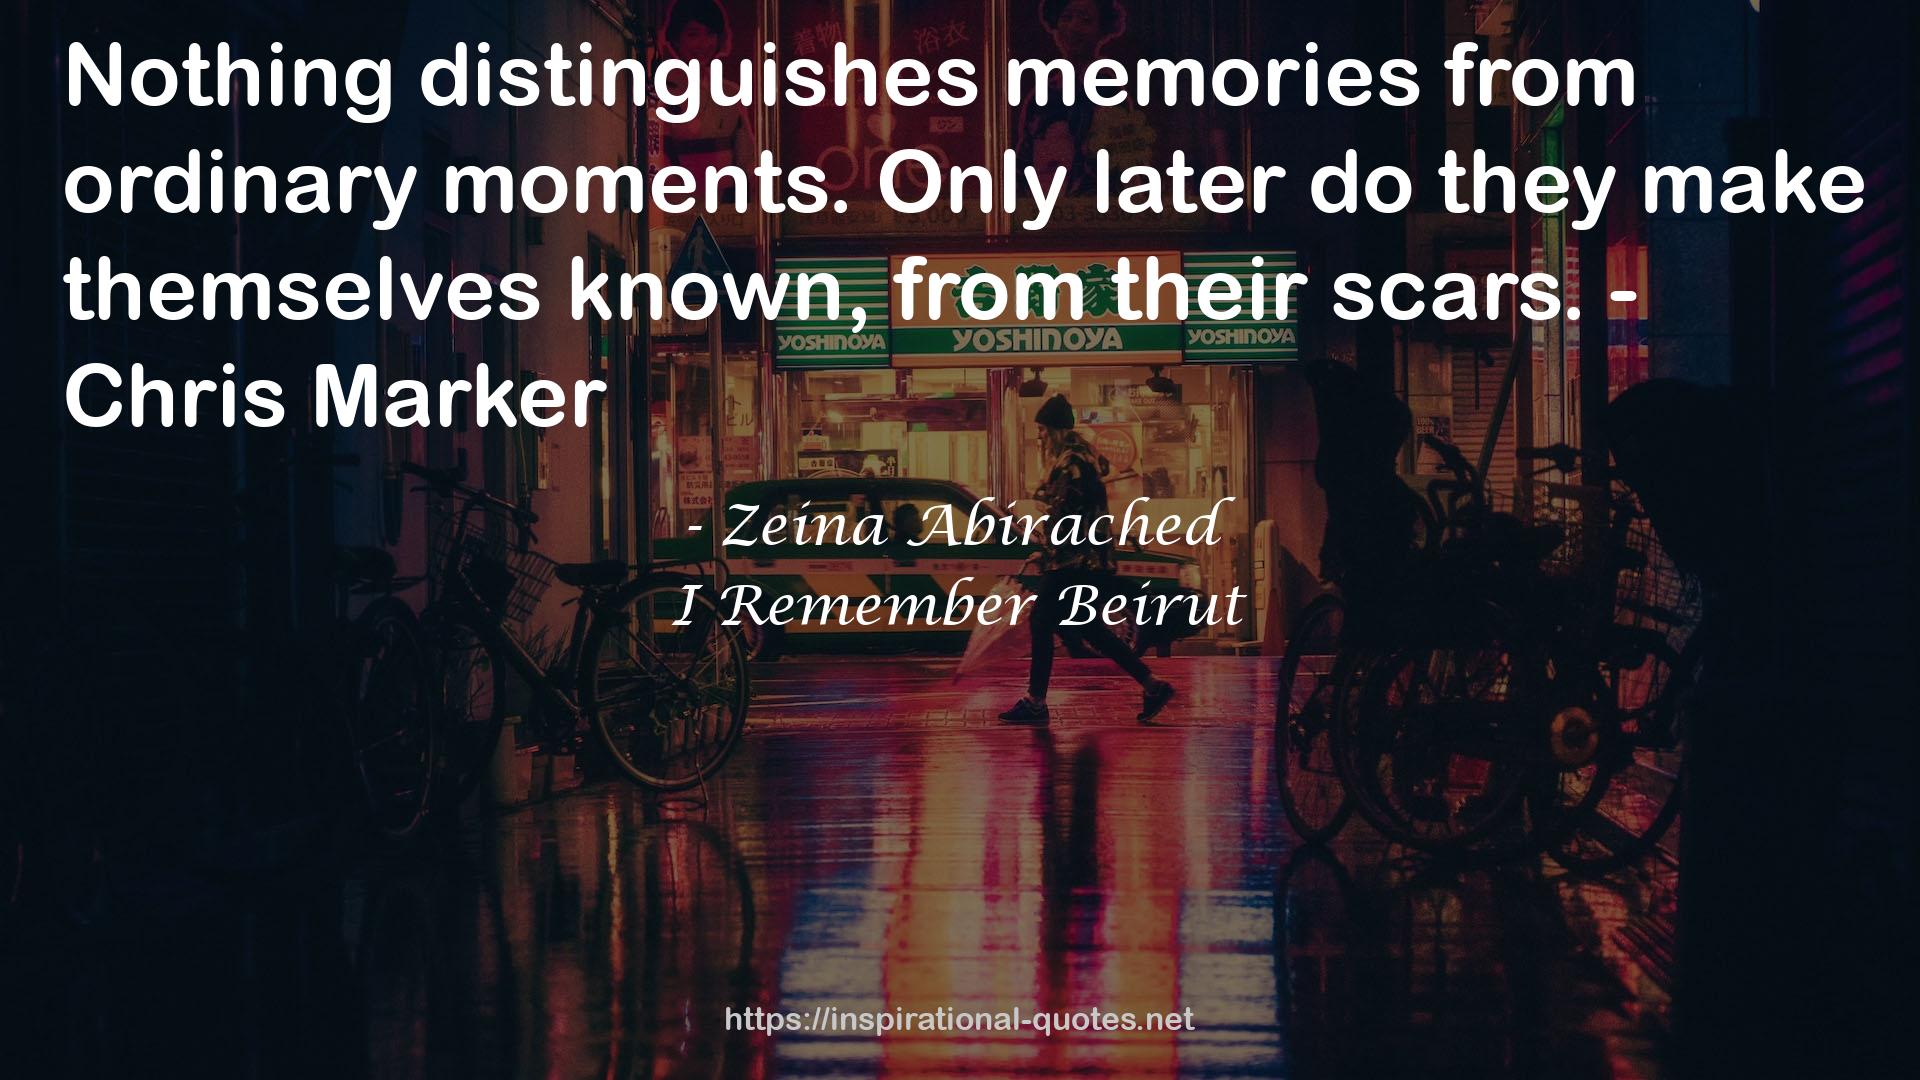 Zeina Abirached QUOTES